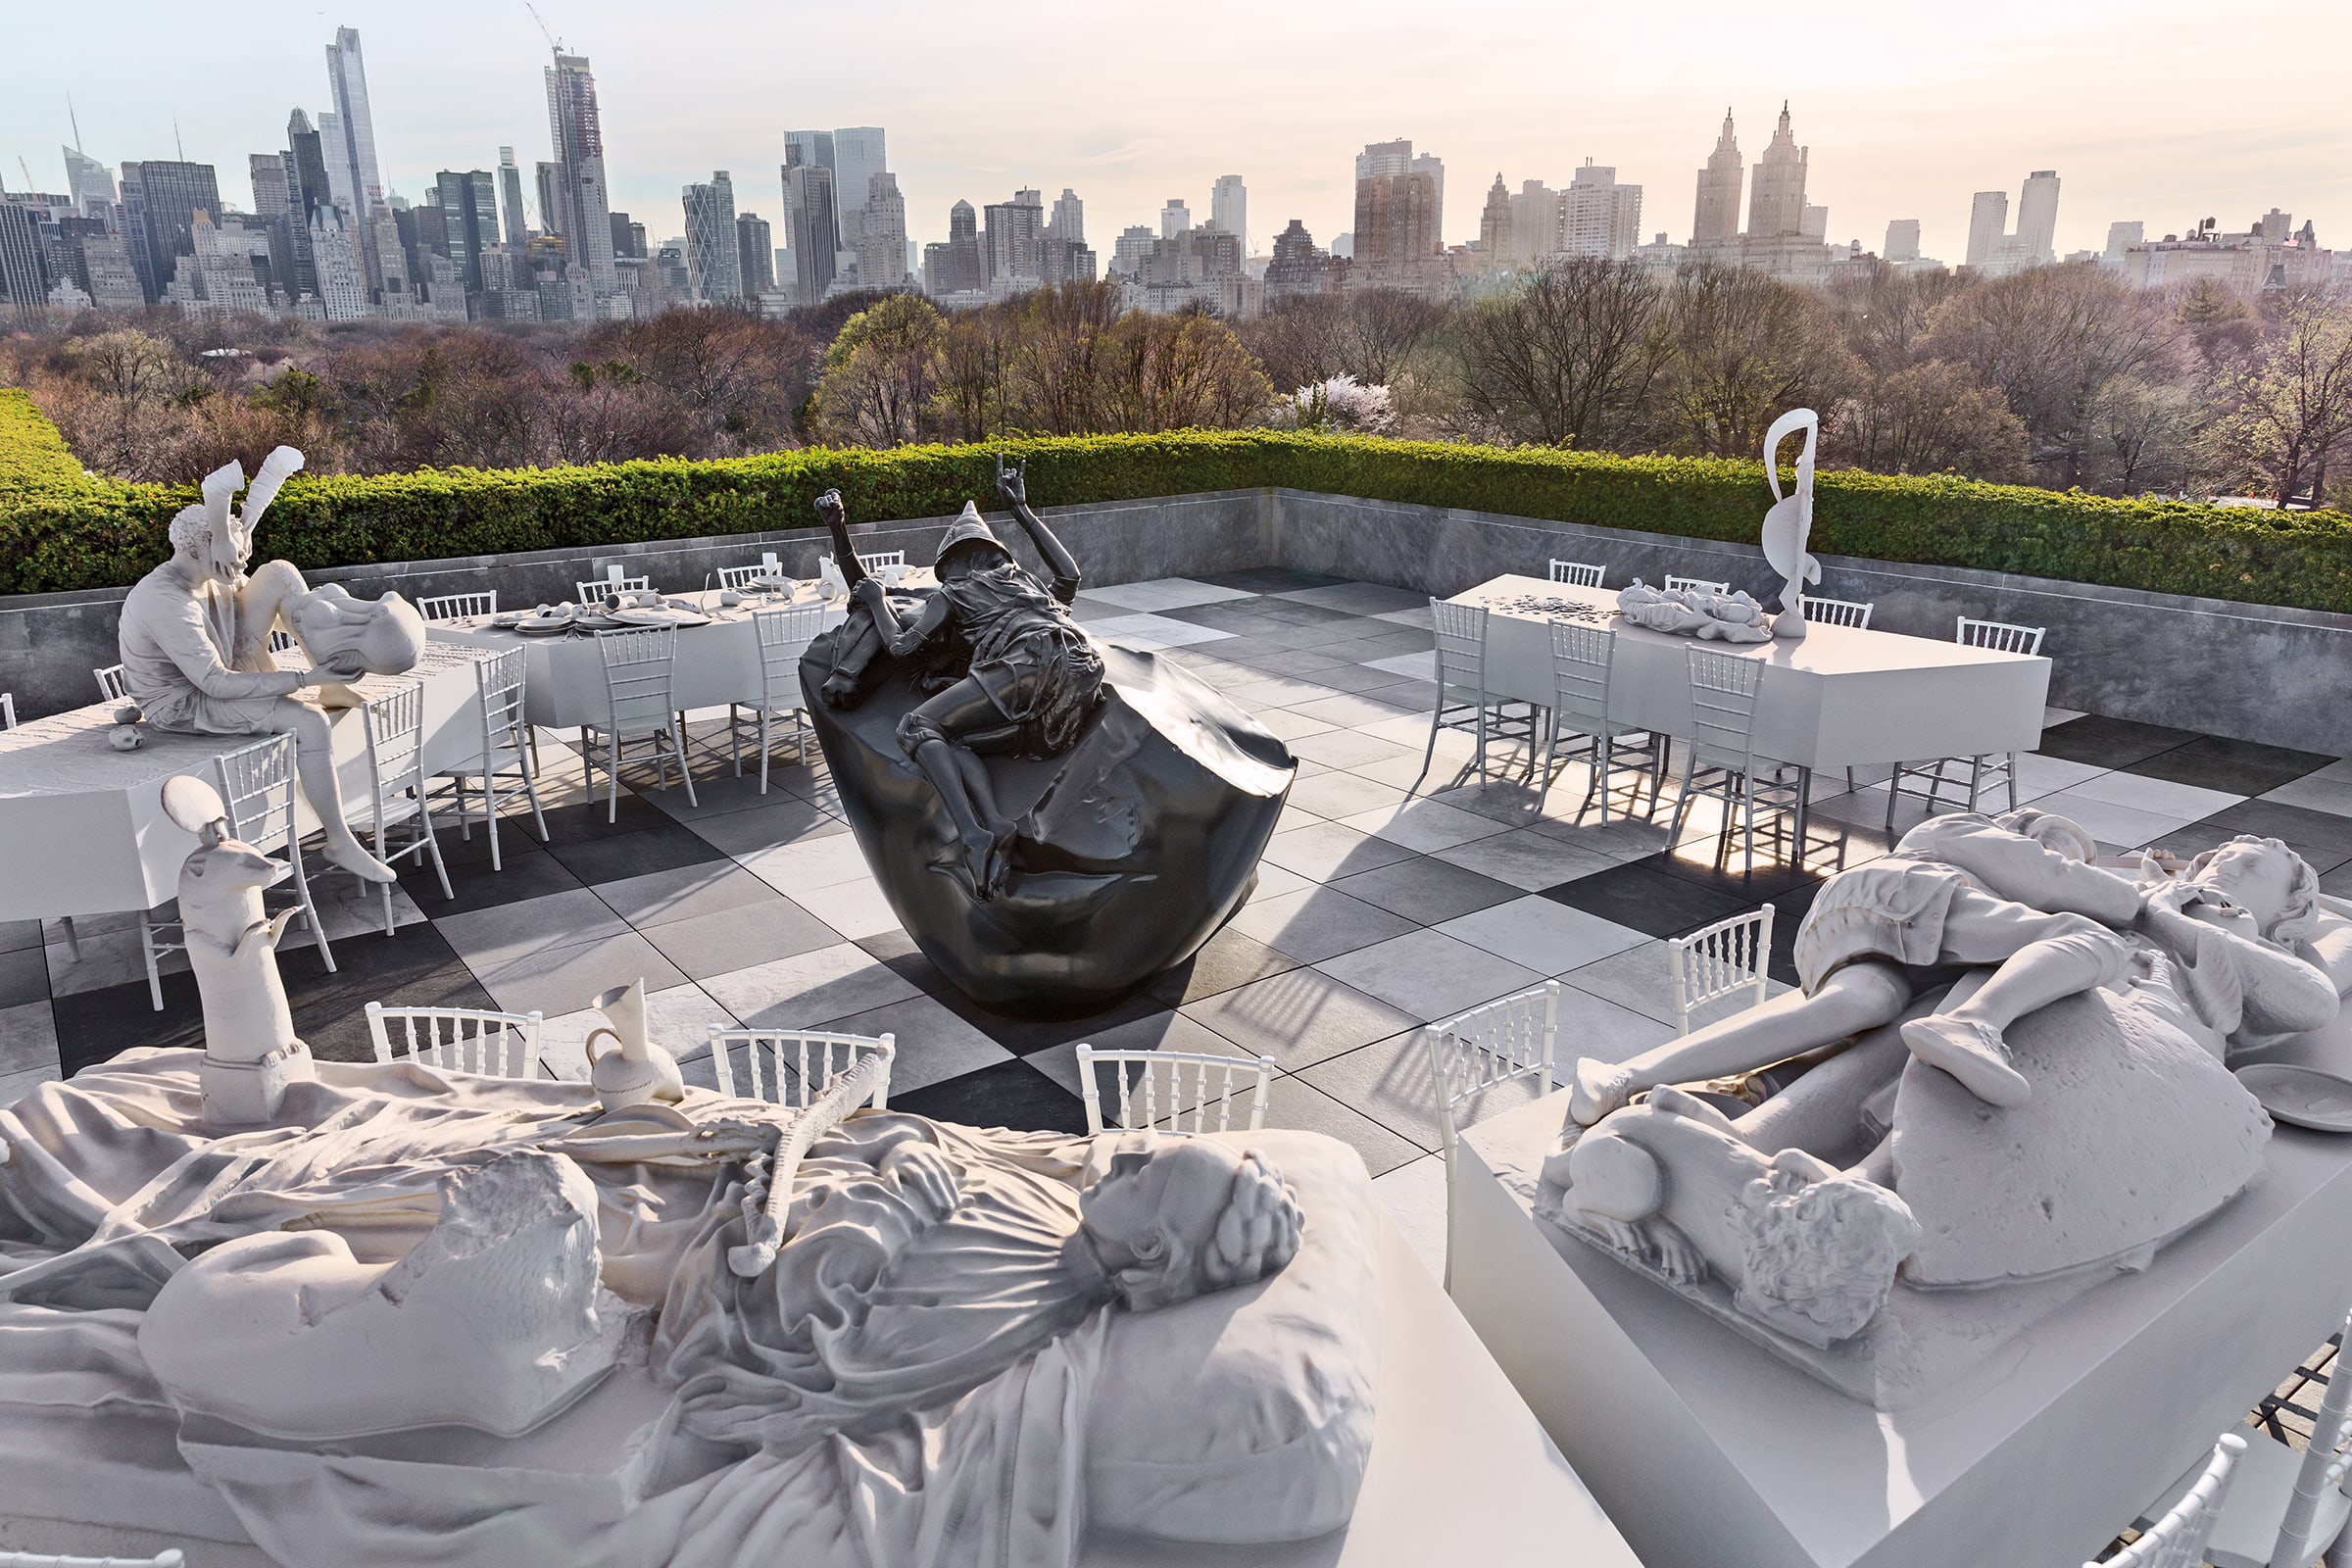 Left: Adrián Villar Rojas, The Theatre of Disappearance, 2017. Installation view, The Roof Garden Commission at The Metropolitan Museum of Art, New York, 2017. Courtesy of the artist, Marian Goodman Gallery, and kurimanzutto. Photo by Michael Kirby Smith.